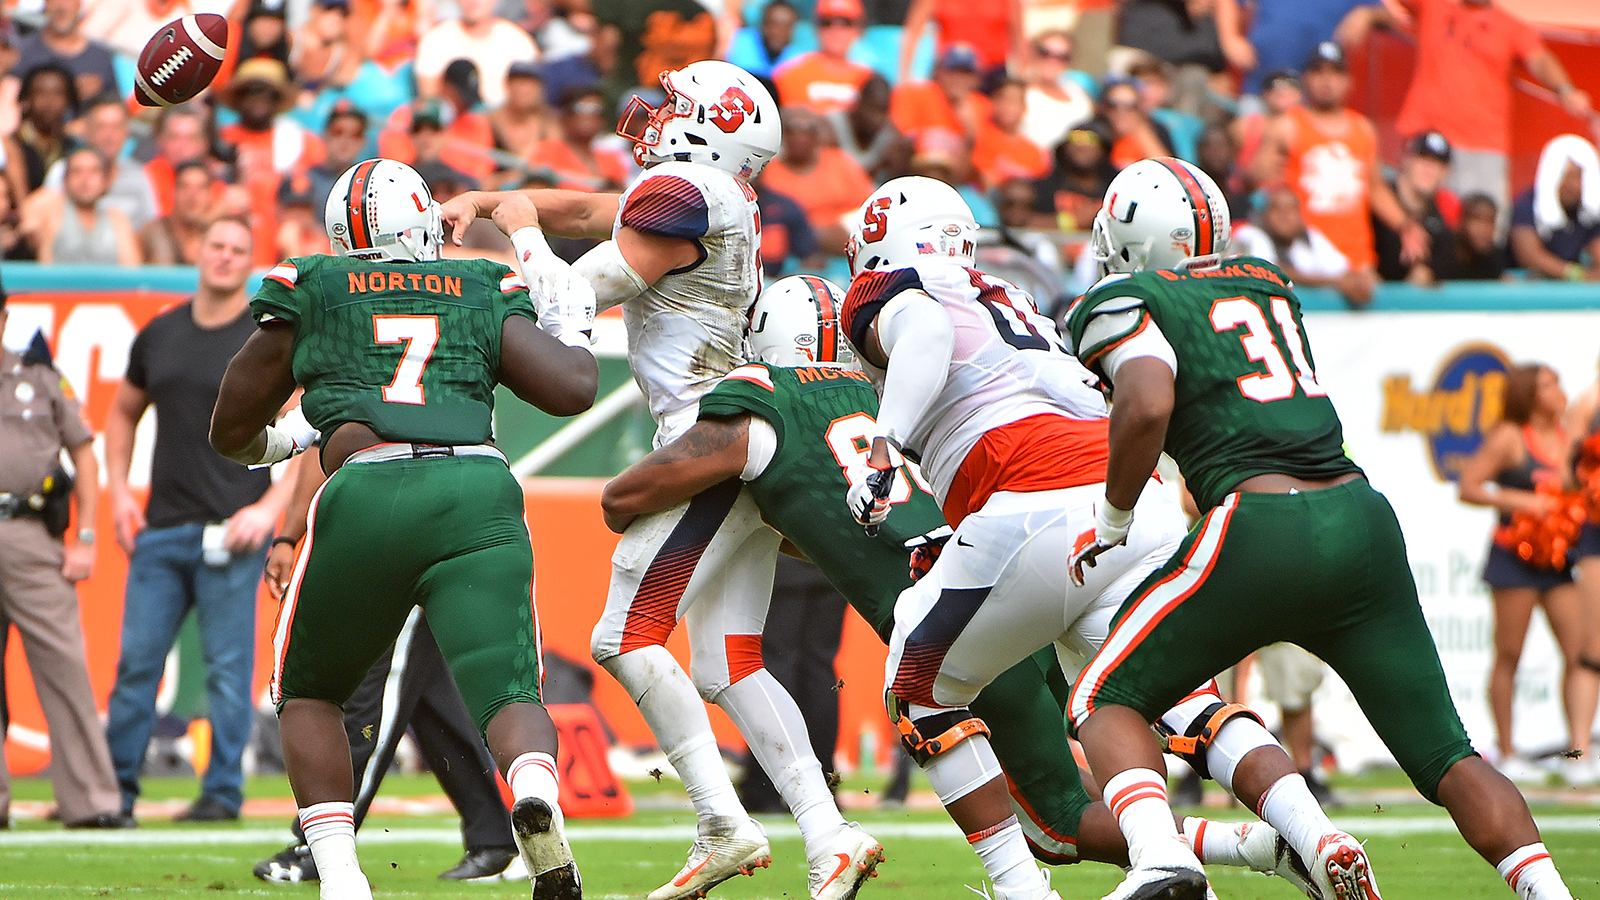 Miami withstands test from Syracuse, scores late to extend winning streak